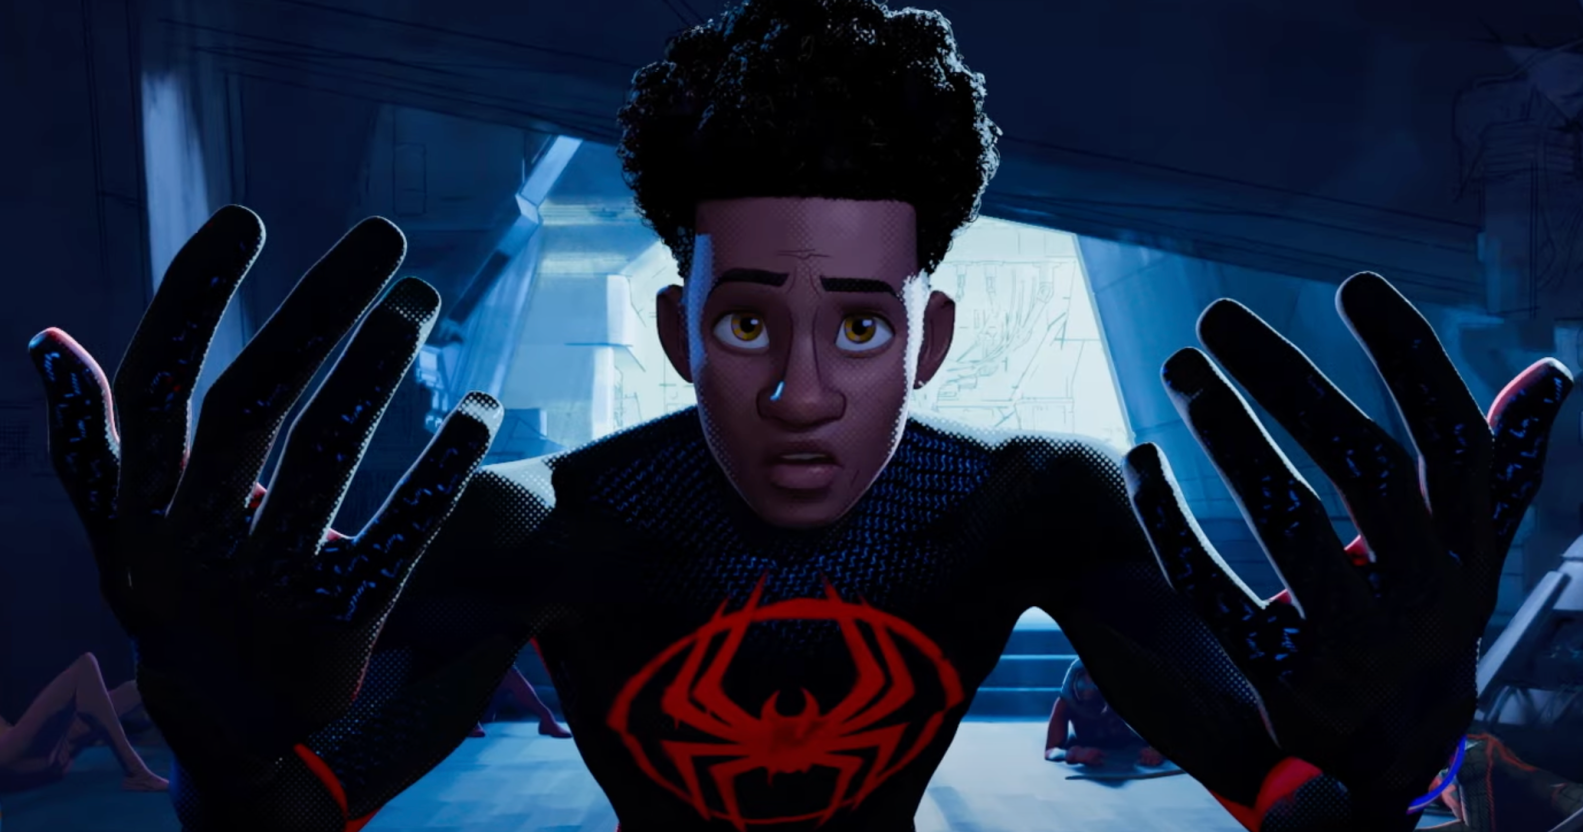 Anteprime USA per Spider-Man: Across the Spider-Verse